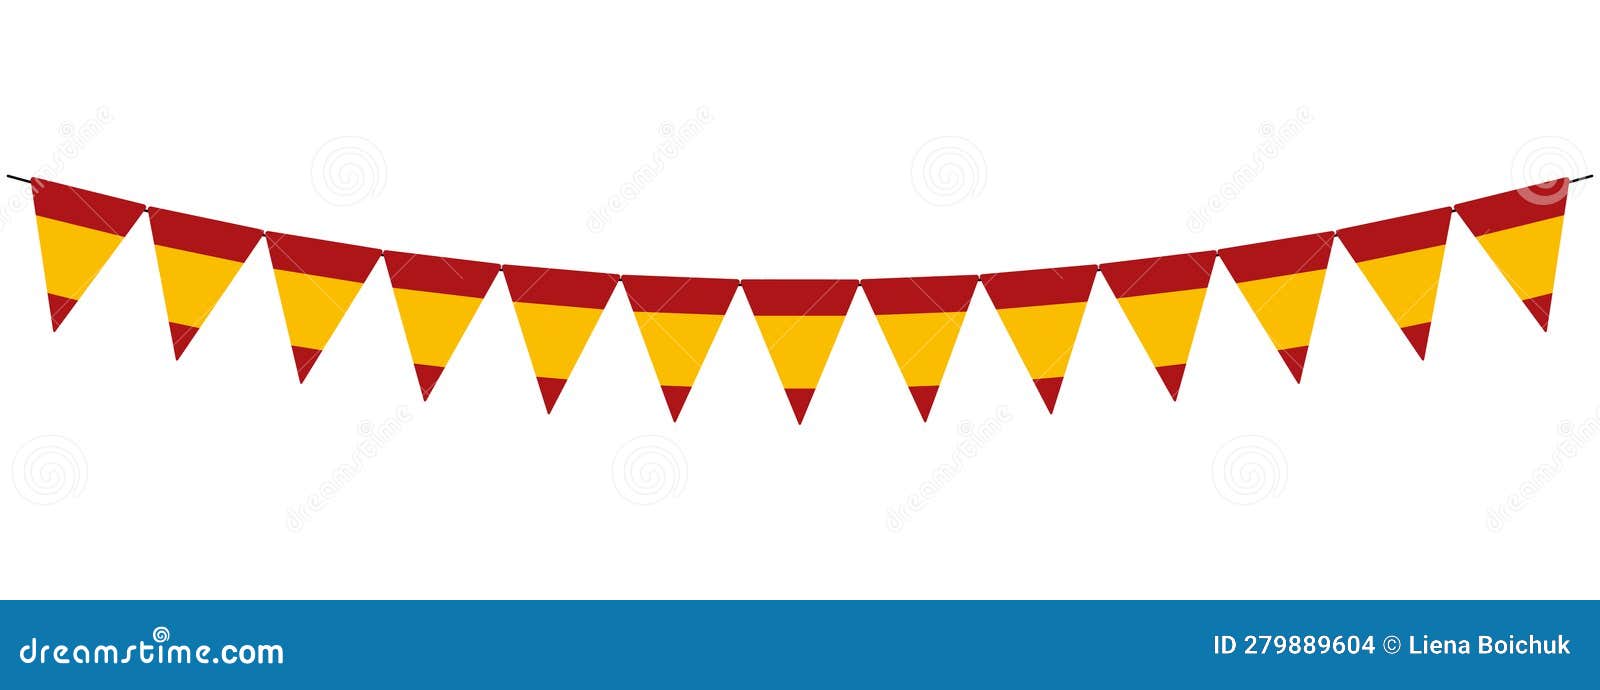 national day of spain, bunting garland, red and yellow pennants, retro style  decorative , fiesta nacional